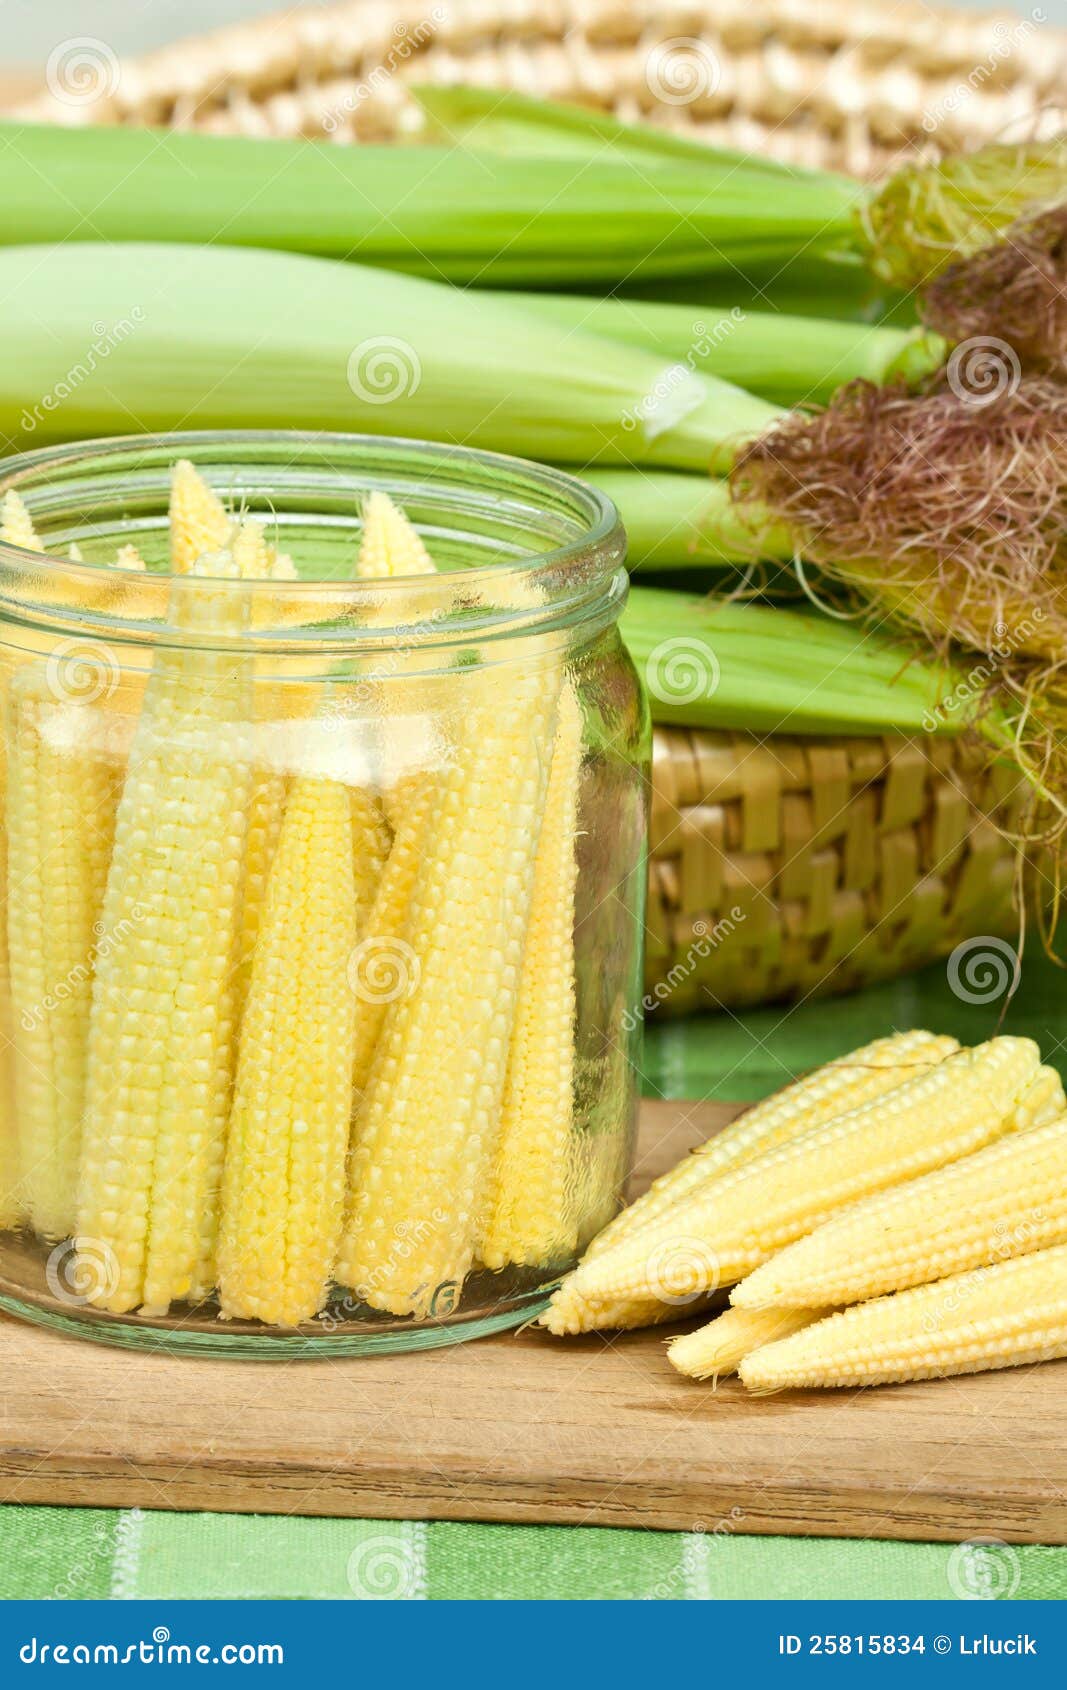 corn for preserving.